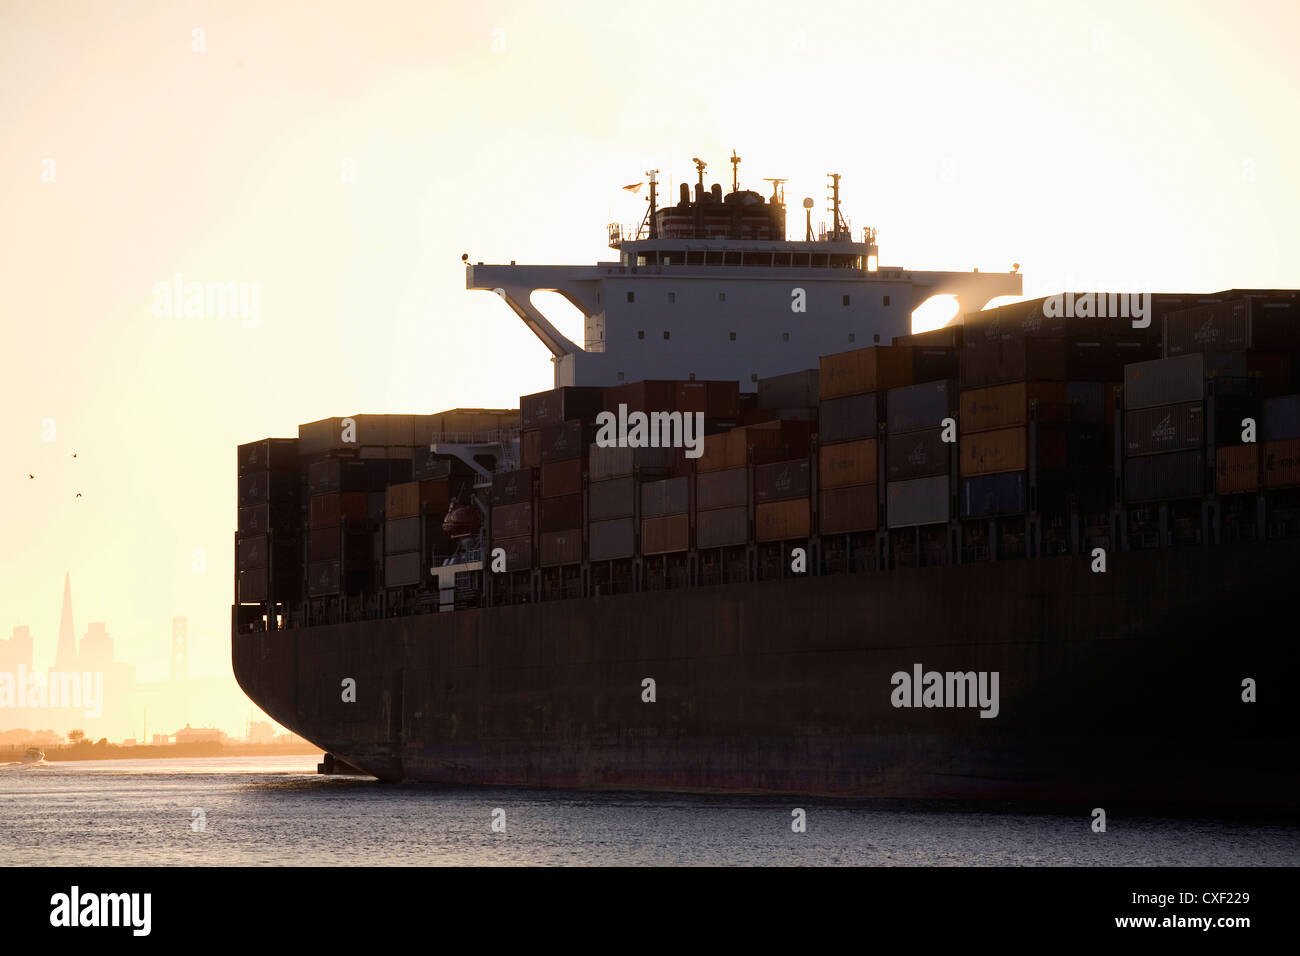 Containers on container ship Stock Photo